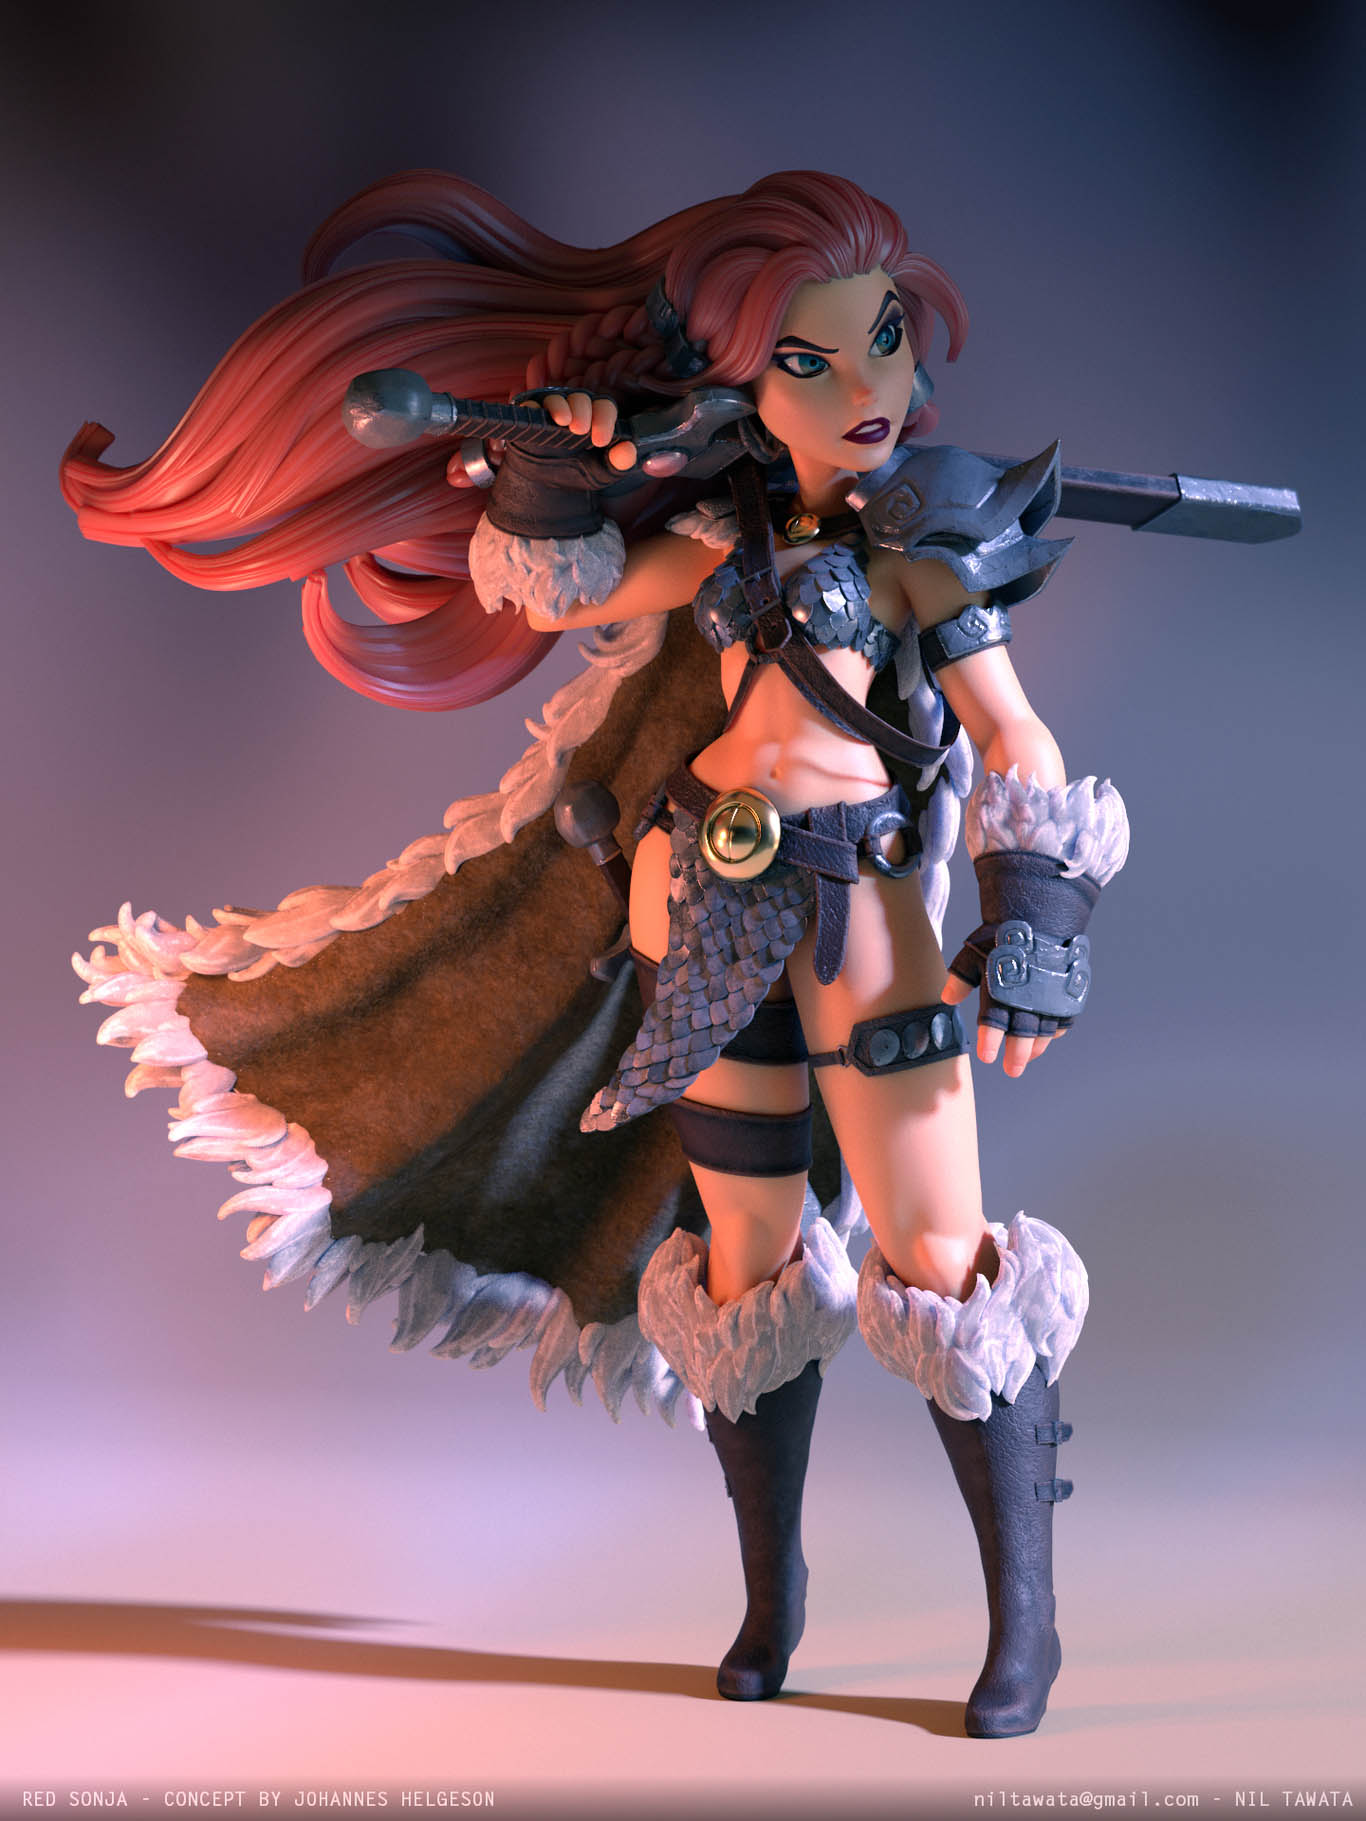 3d model character red sonja